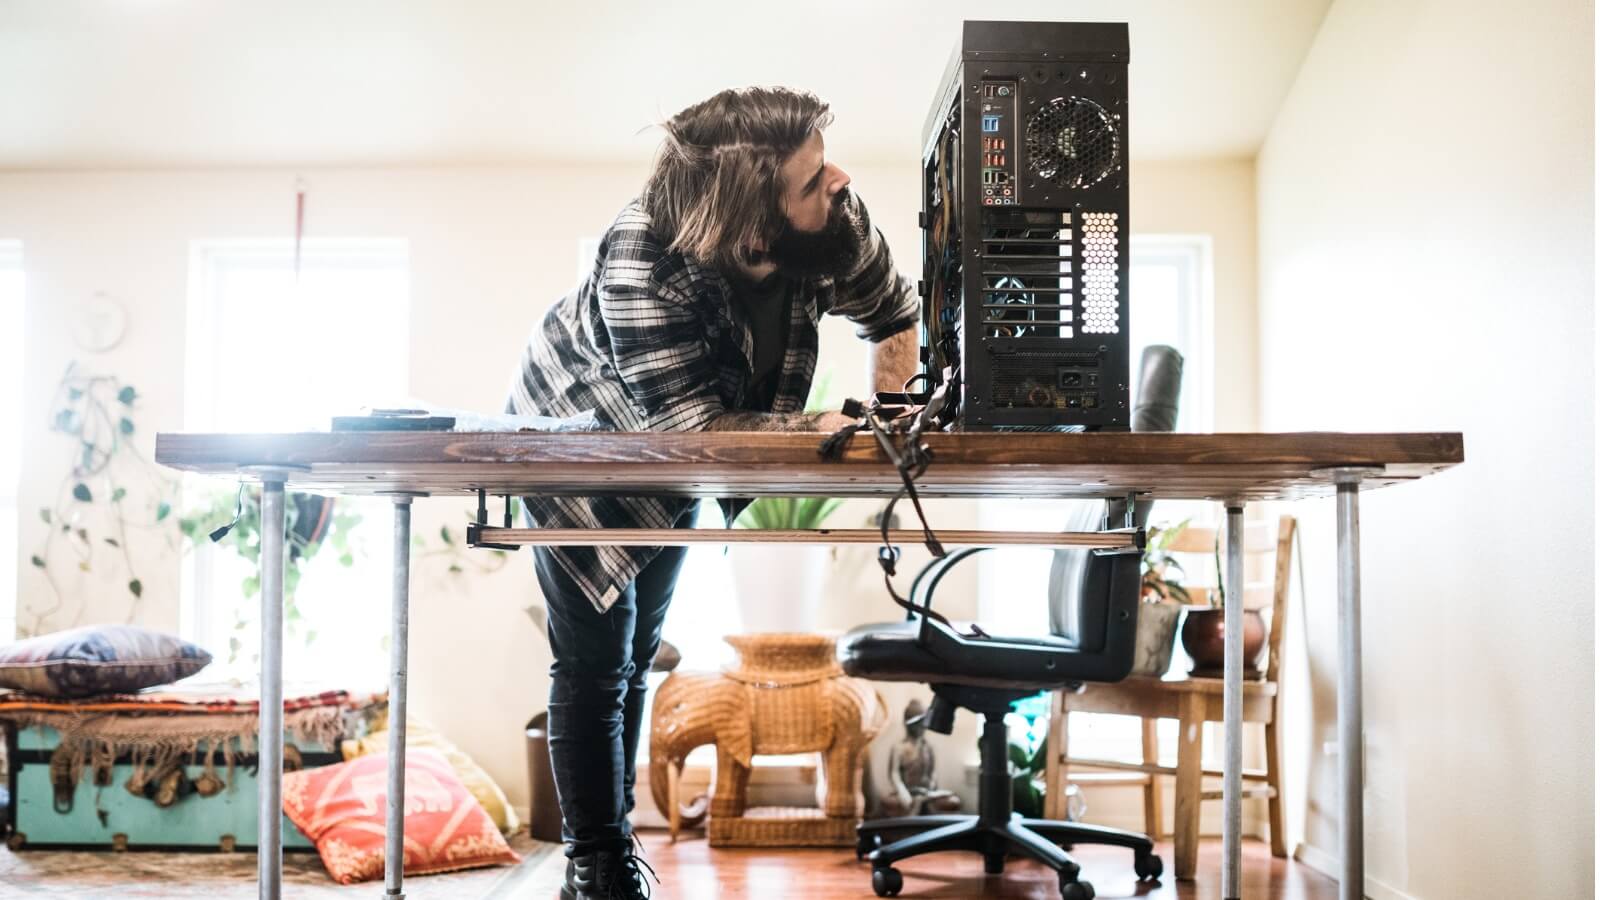 Man looking at plugging in cables to computer.